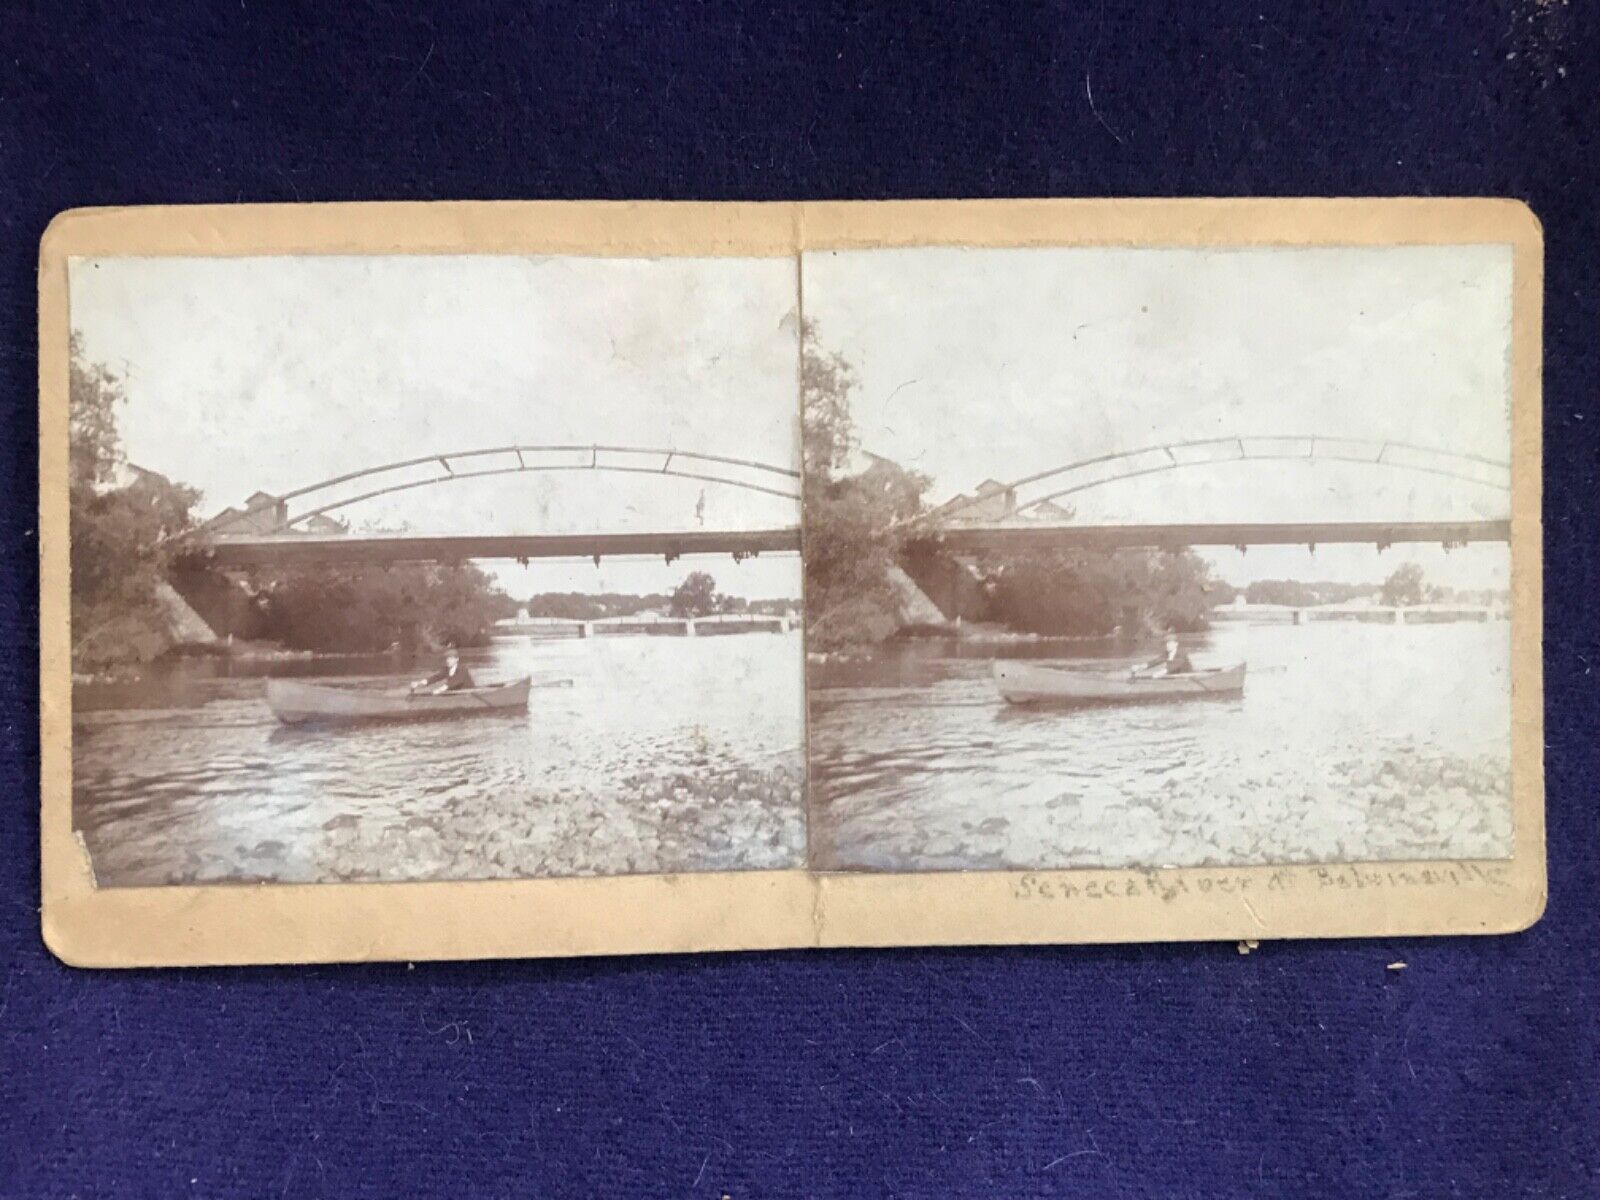 ANTIQUE 2 SIDED REAL PHOTO STEREOVIEW CARD SENECA RIVER BALDWINSVILLE NY HOPPER